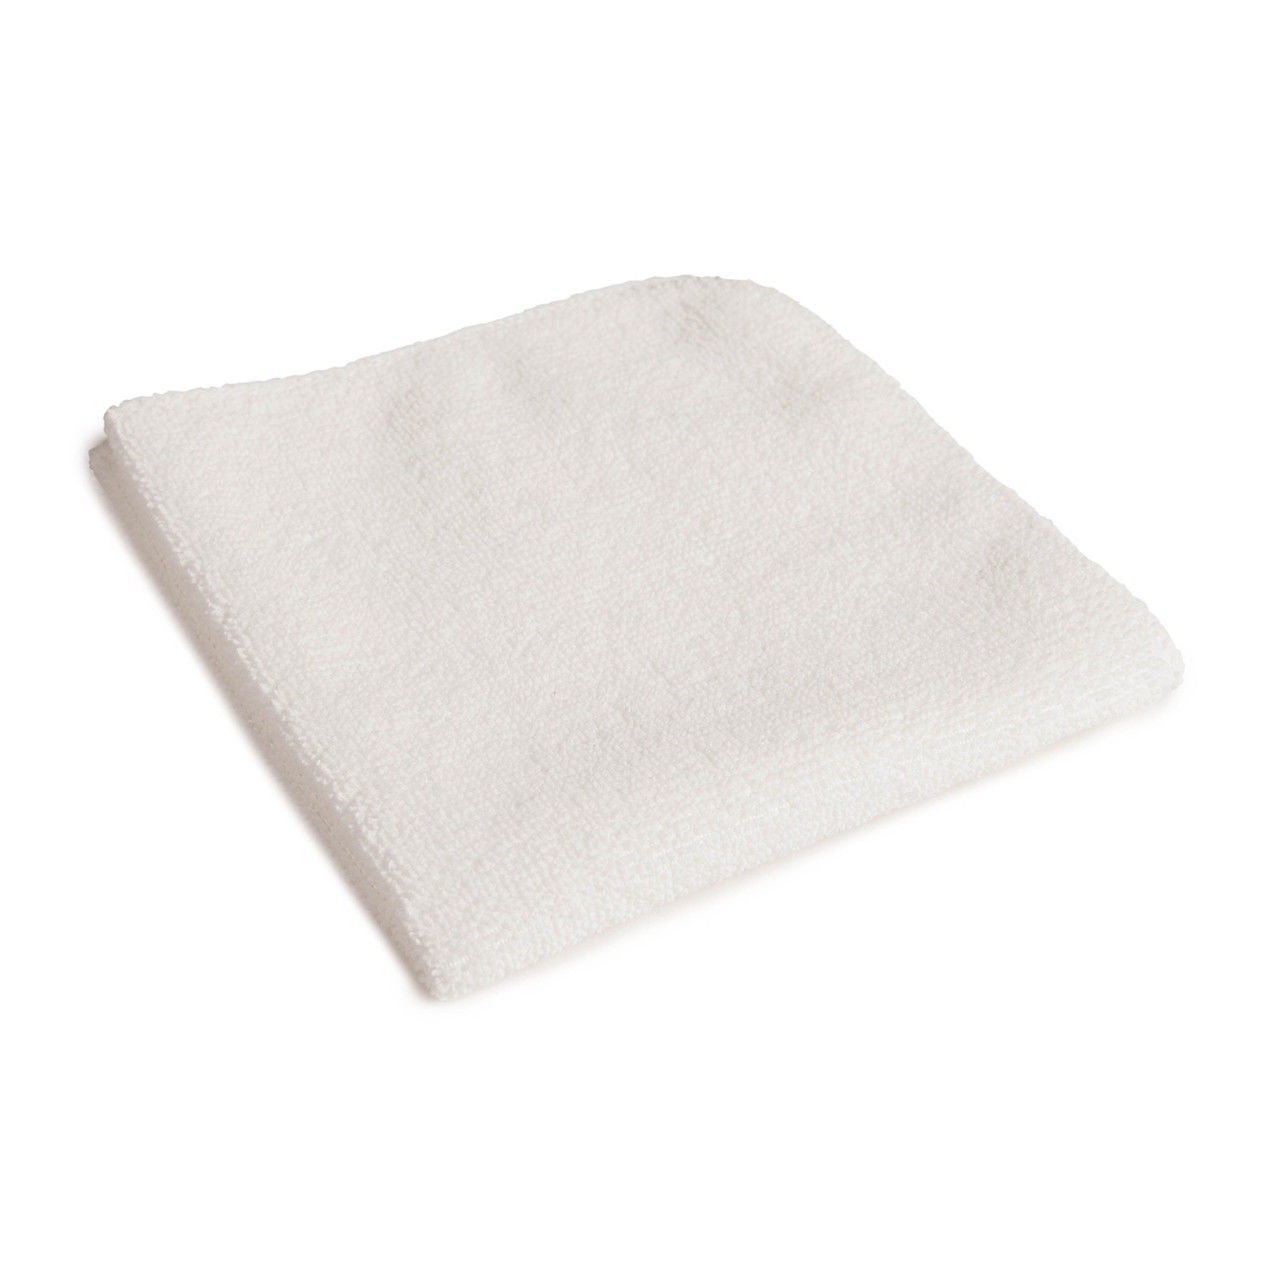 What are the options for Continuous Binding on dairy towels?